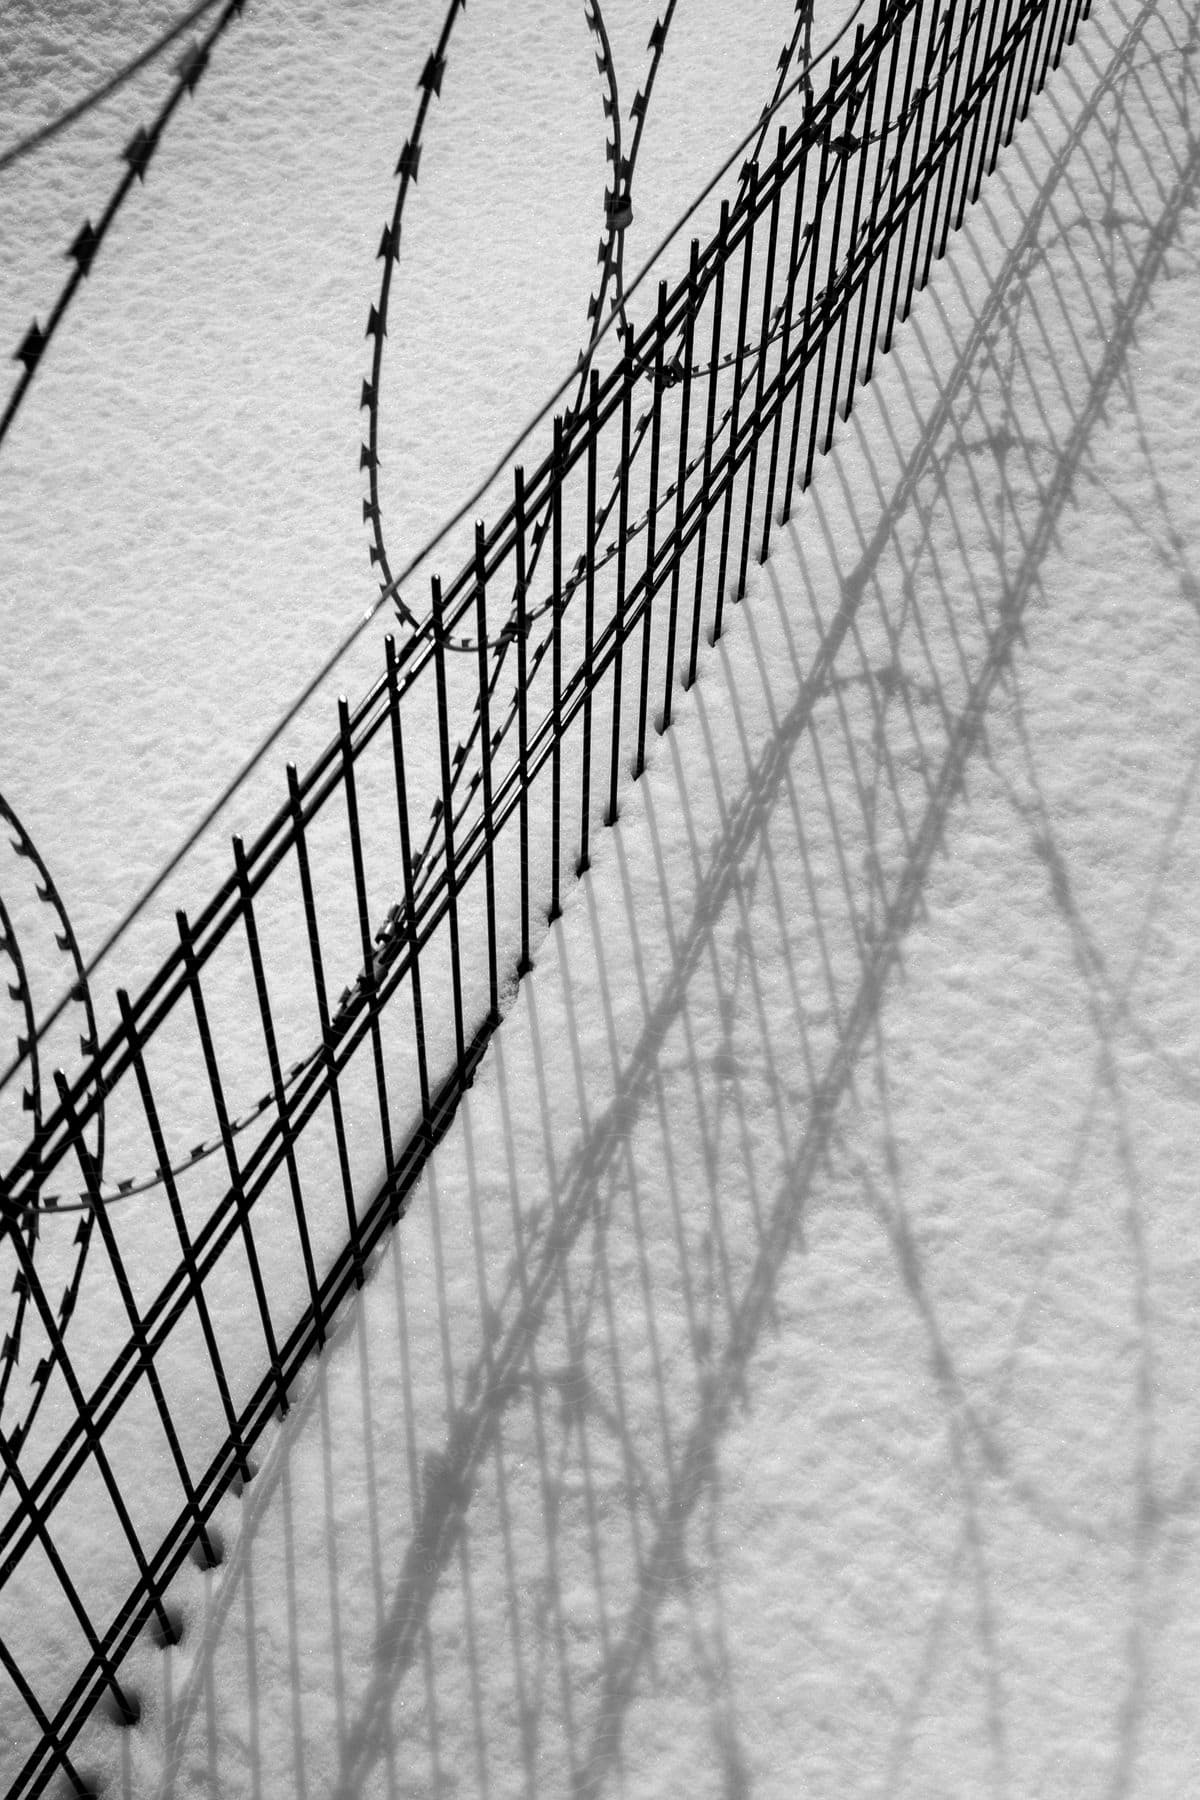 A snowcovered fence with razor wire on top